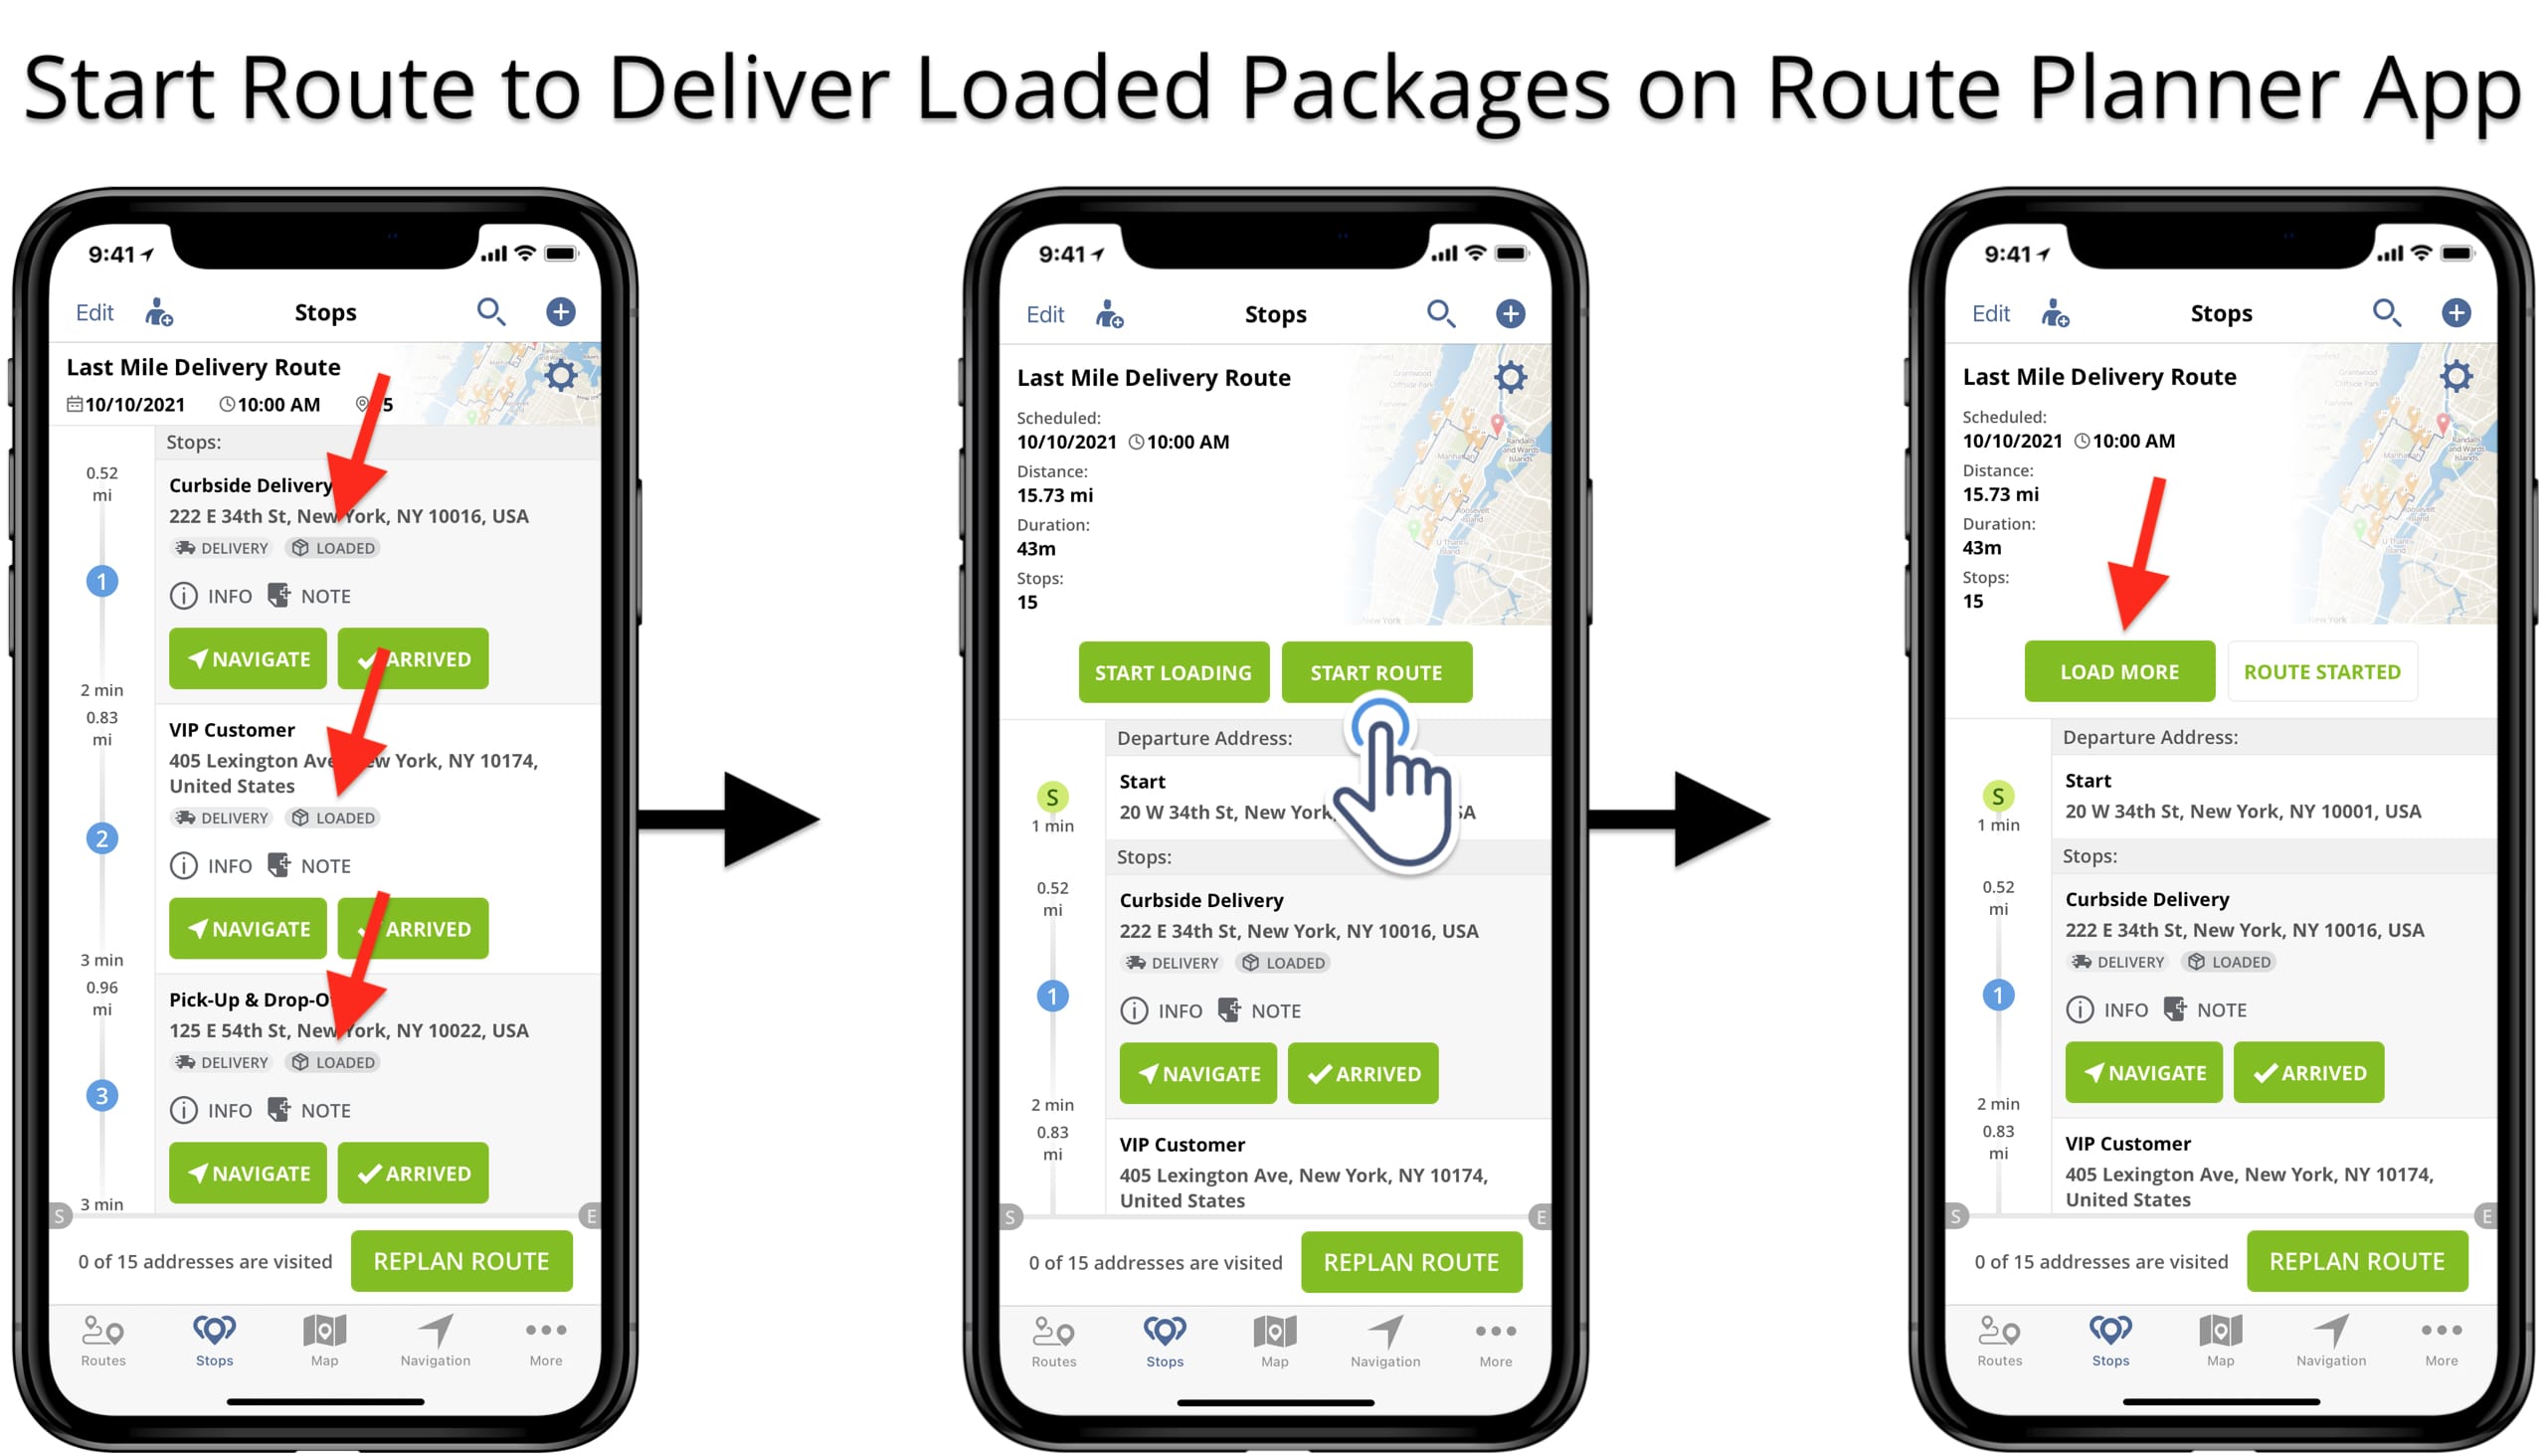 Start route on route planner app and scan barcodes for package delivery and unload confirmation.